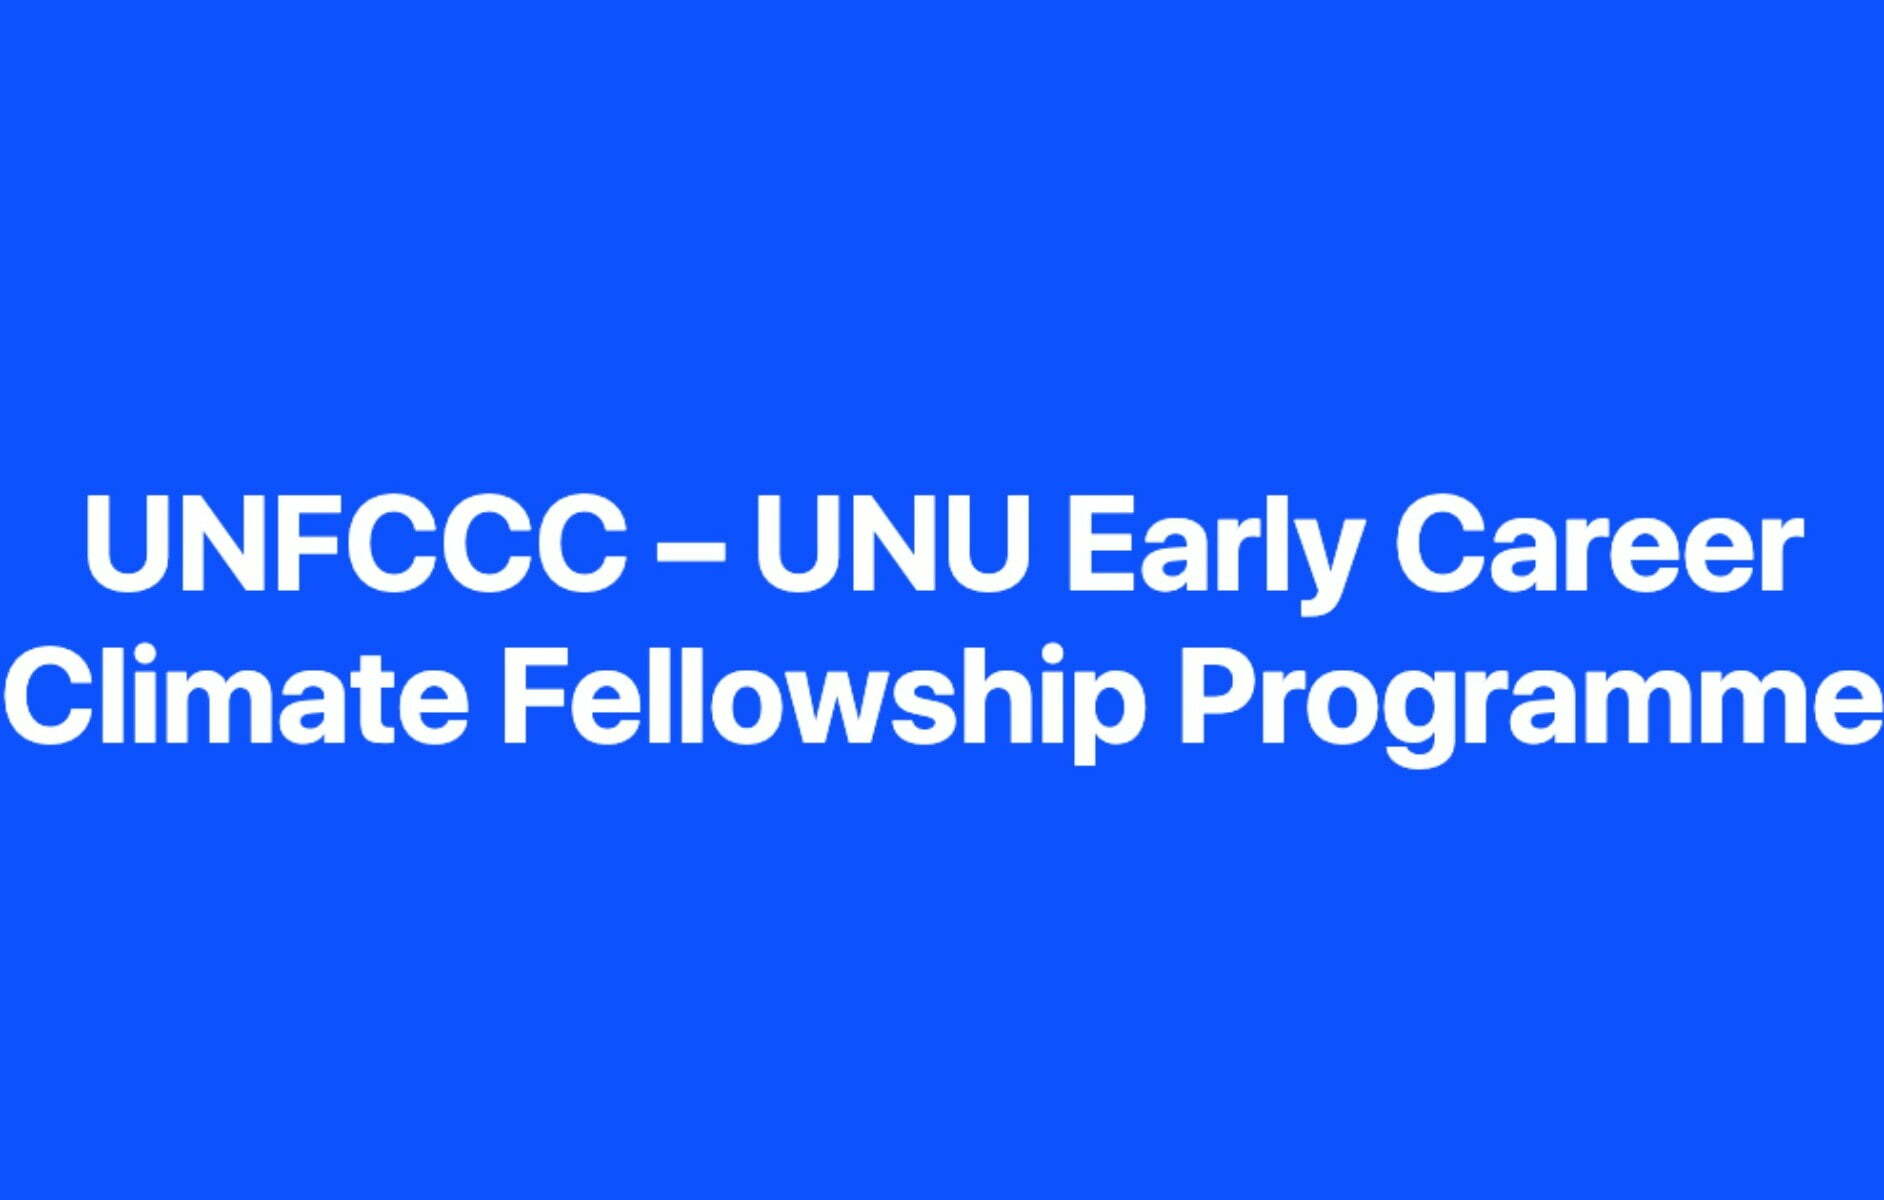 UNFCCC Early Career Climate Fellowship Programme at UNU